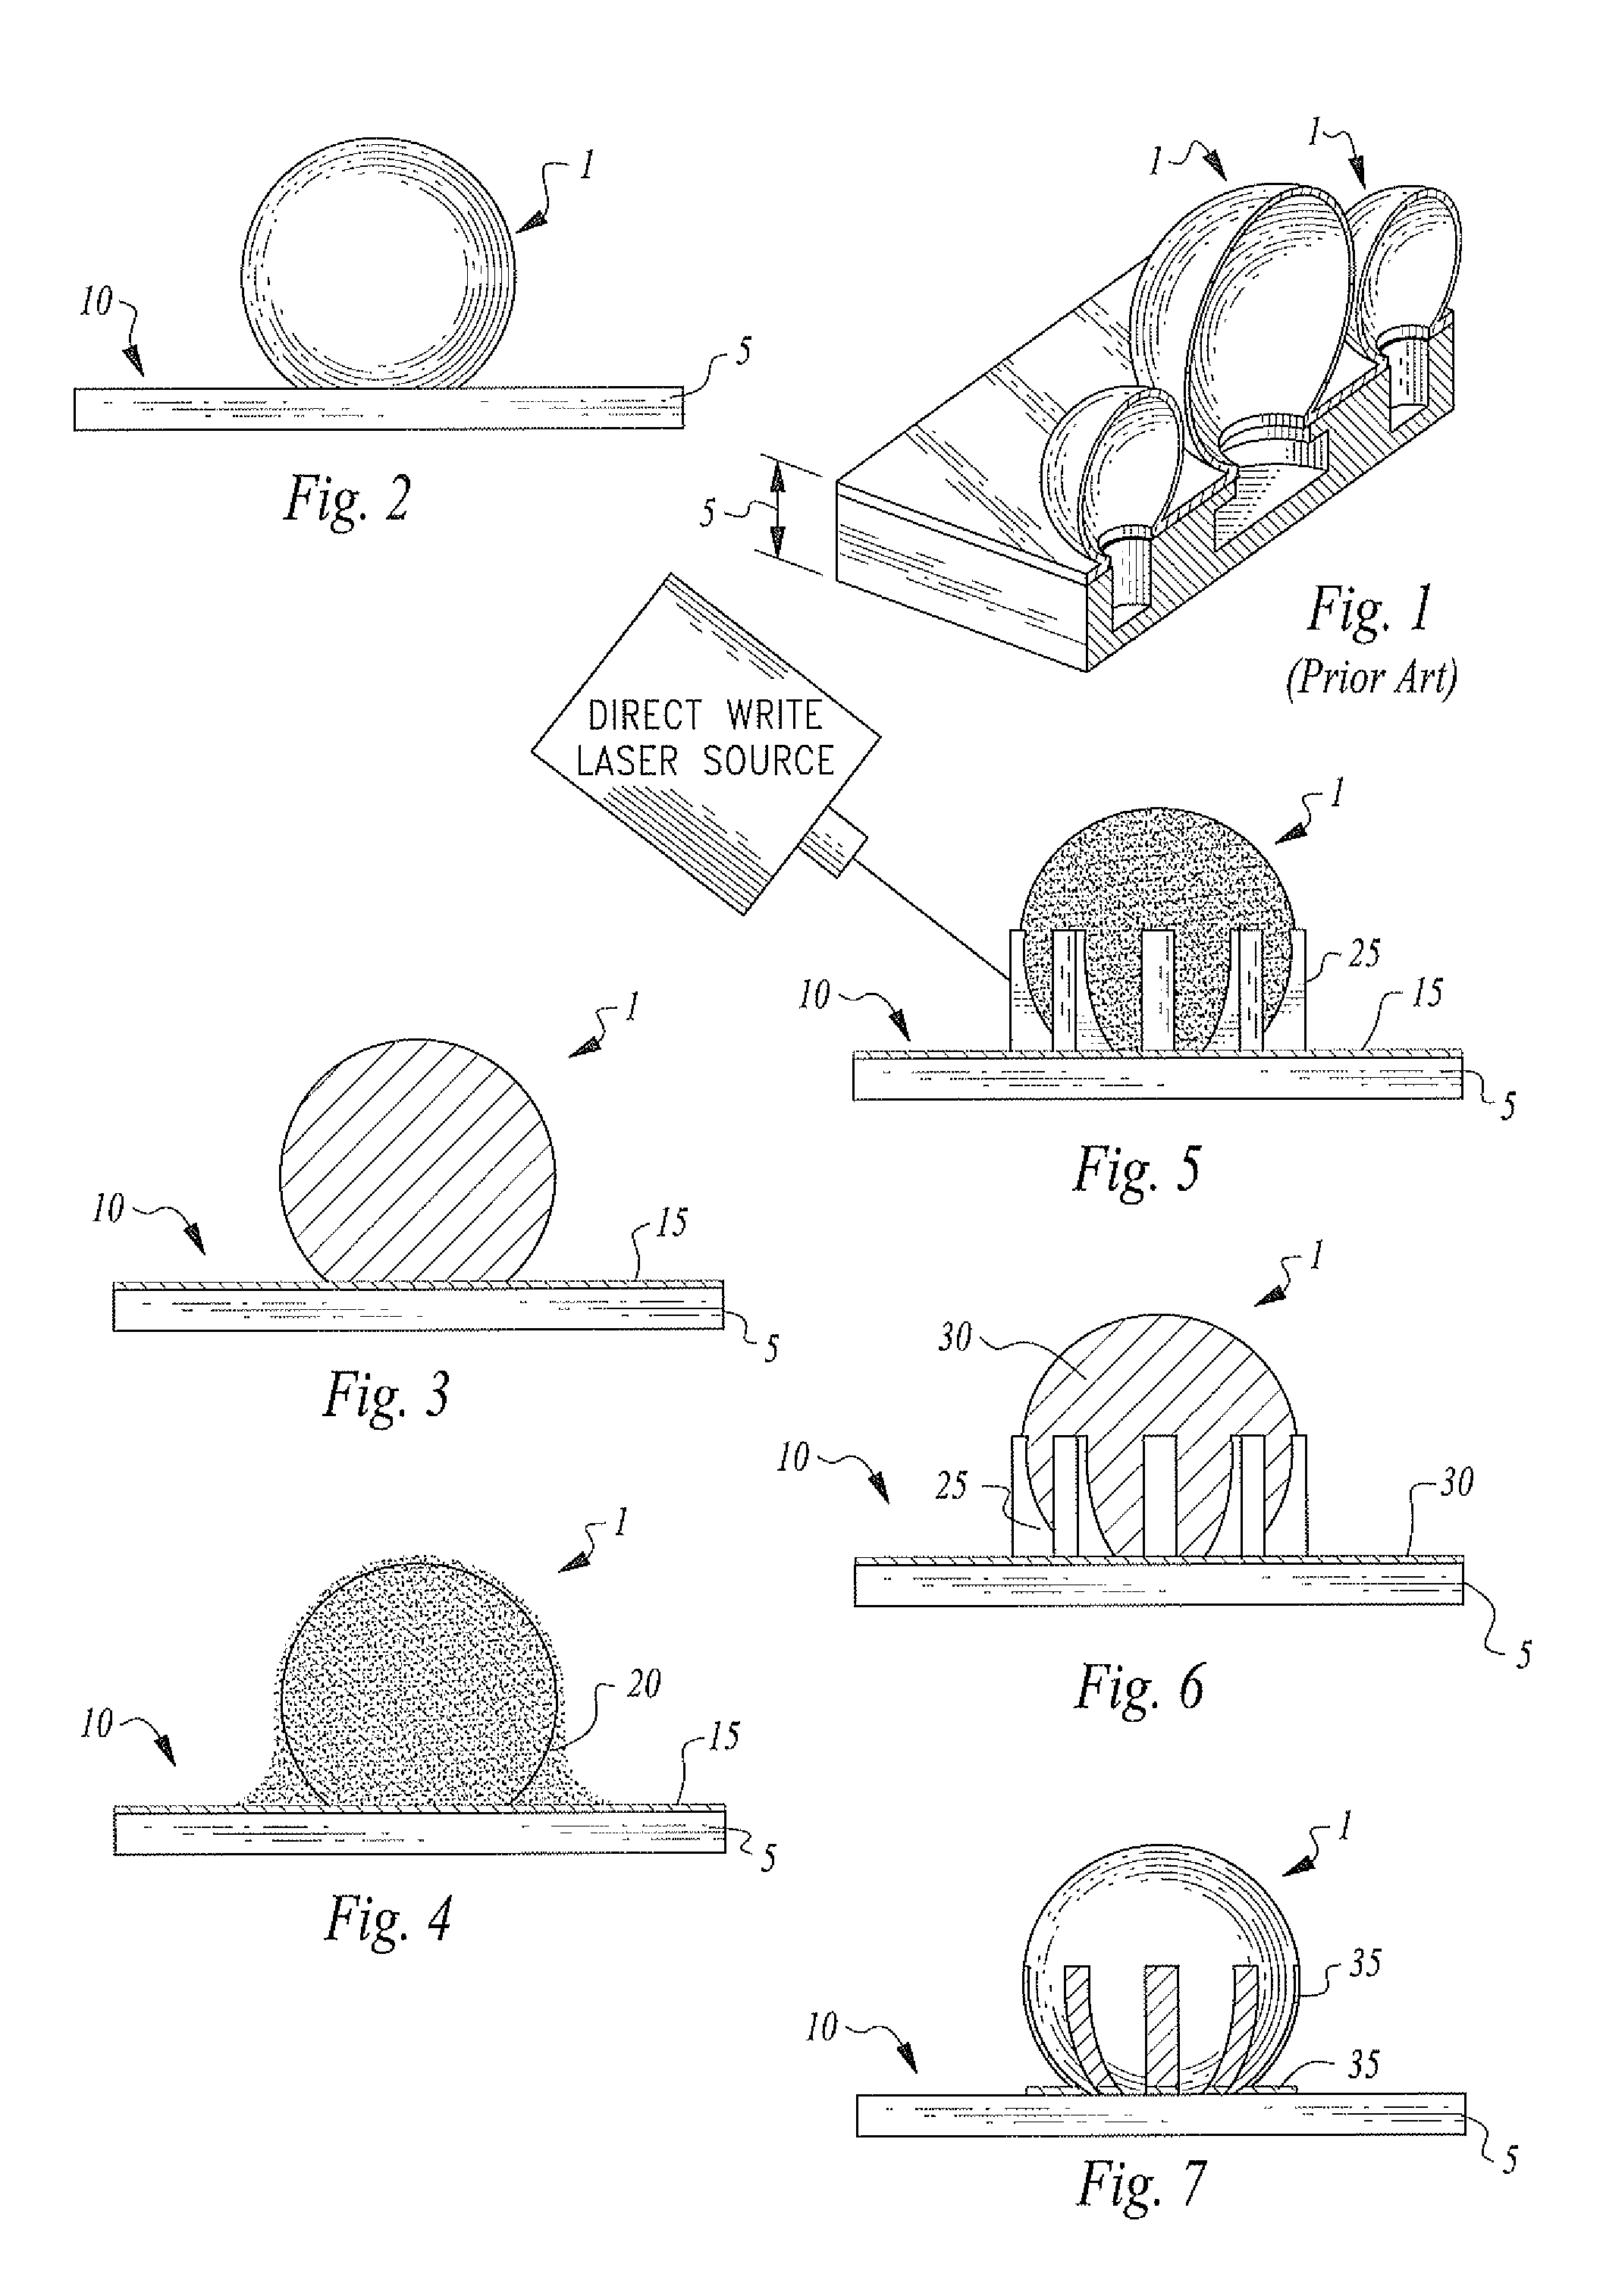 Method for Defining an Electronically Conductive Metal Structure on a Three-Dimensional Element and a Device Made From the Method